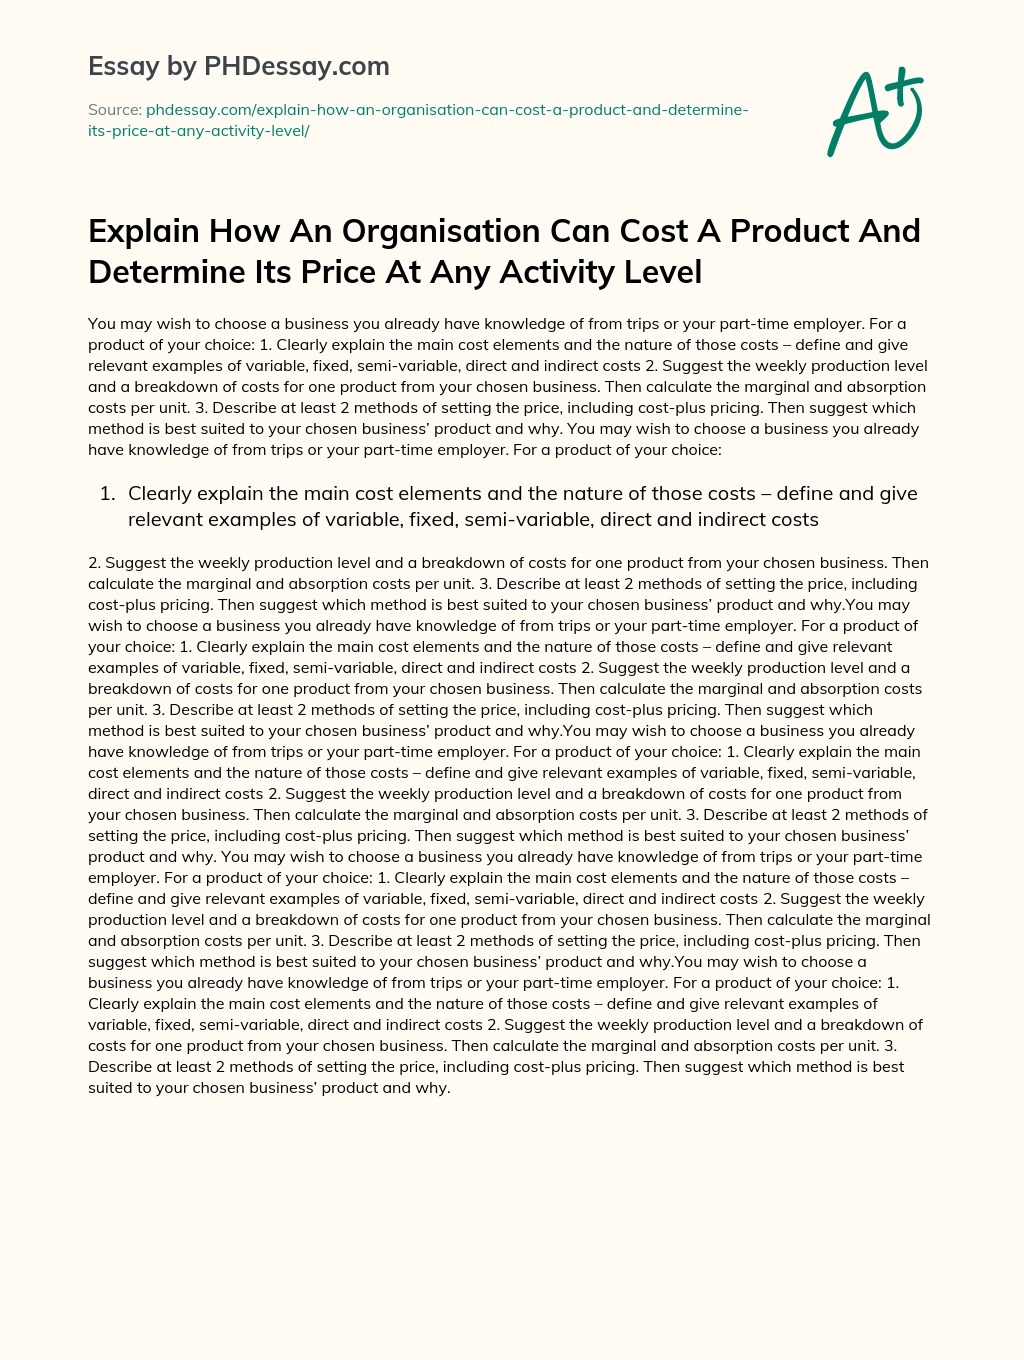 Explain How An Organisation Can Cost A Product And Determine Its Price At Any Activity Level essay